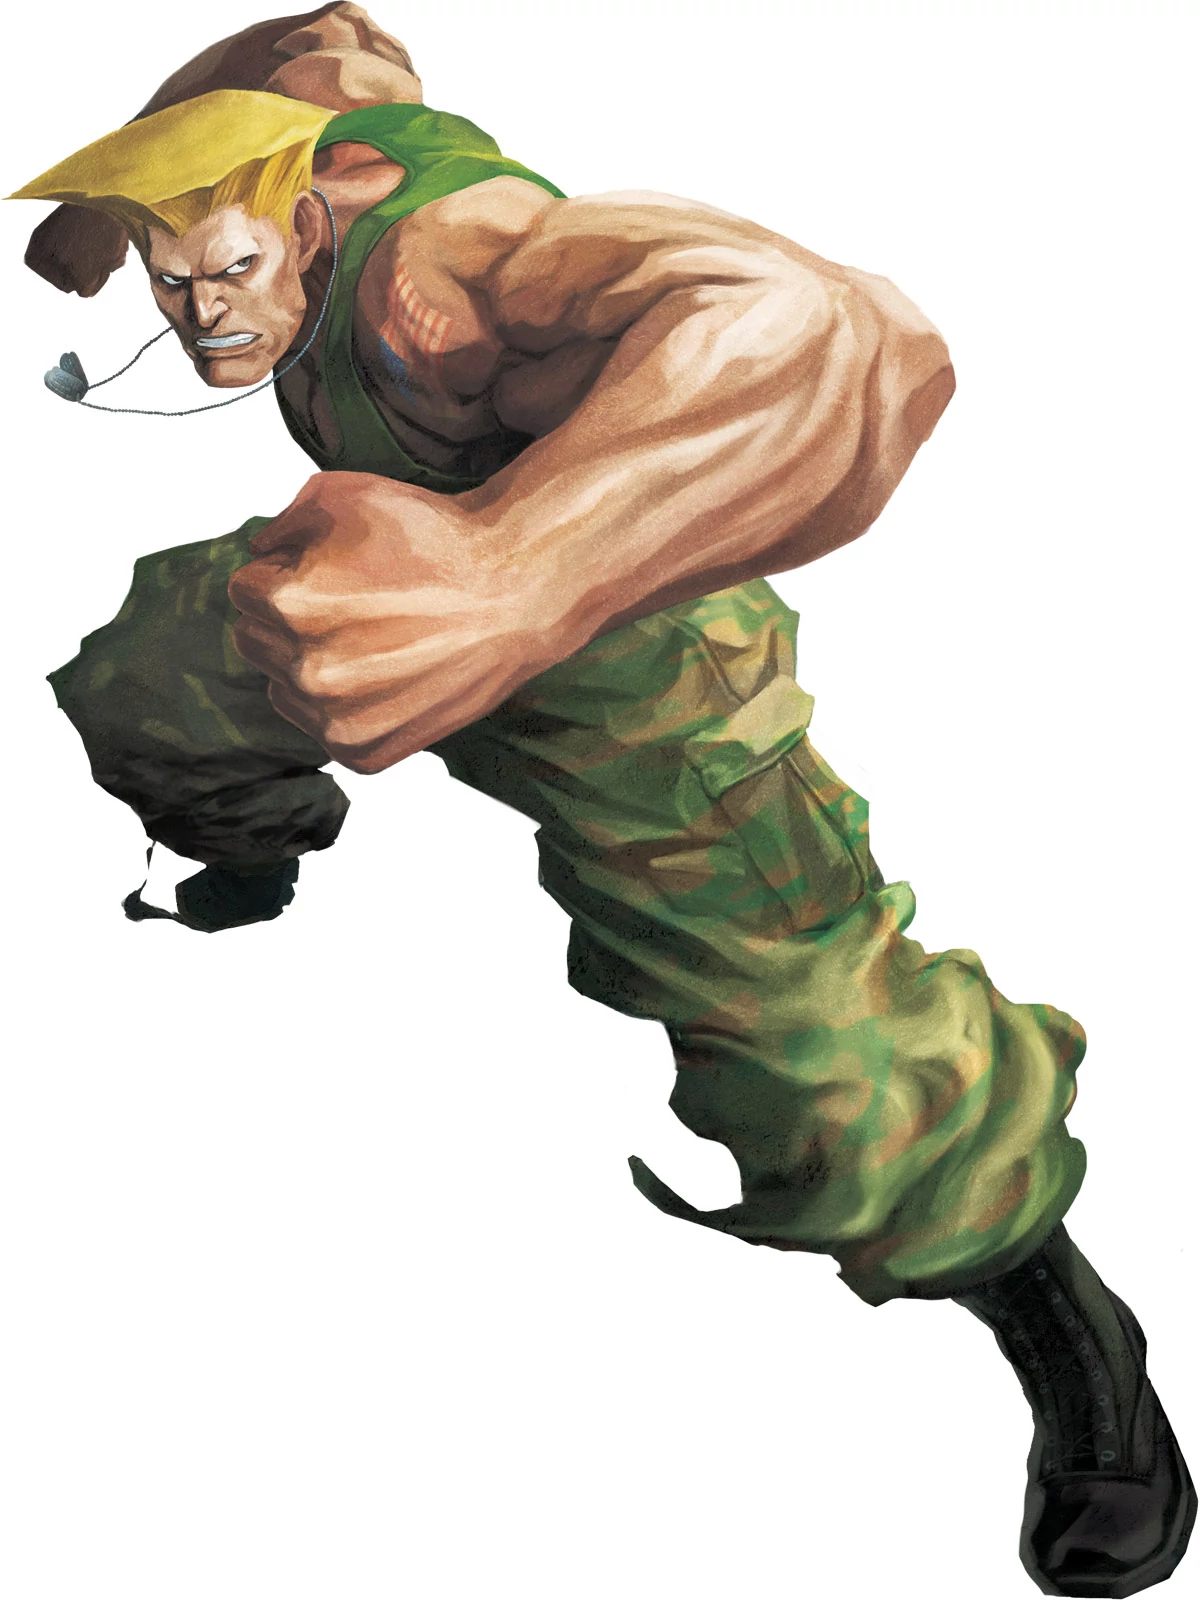 Did you know that Guile and Ken are related? They are Brothers in